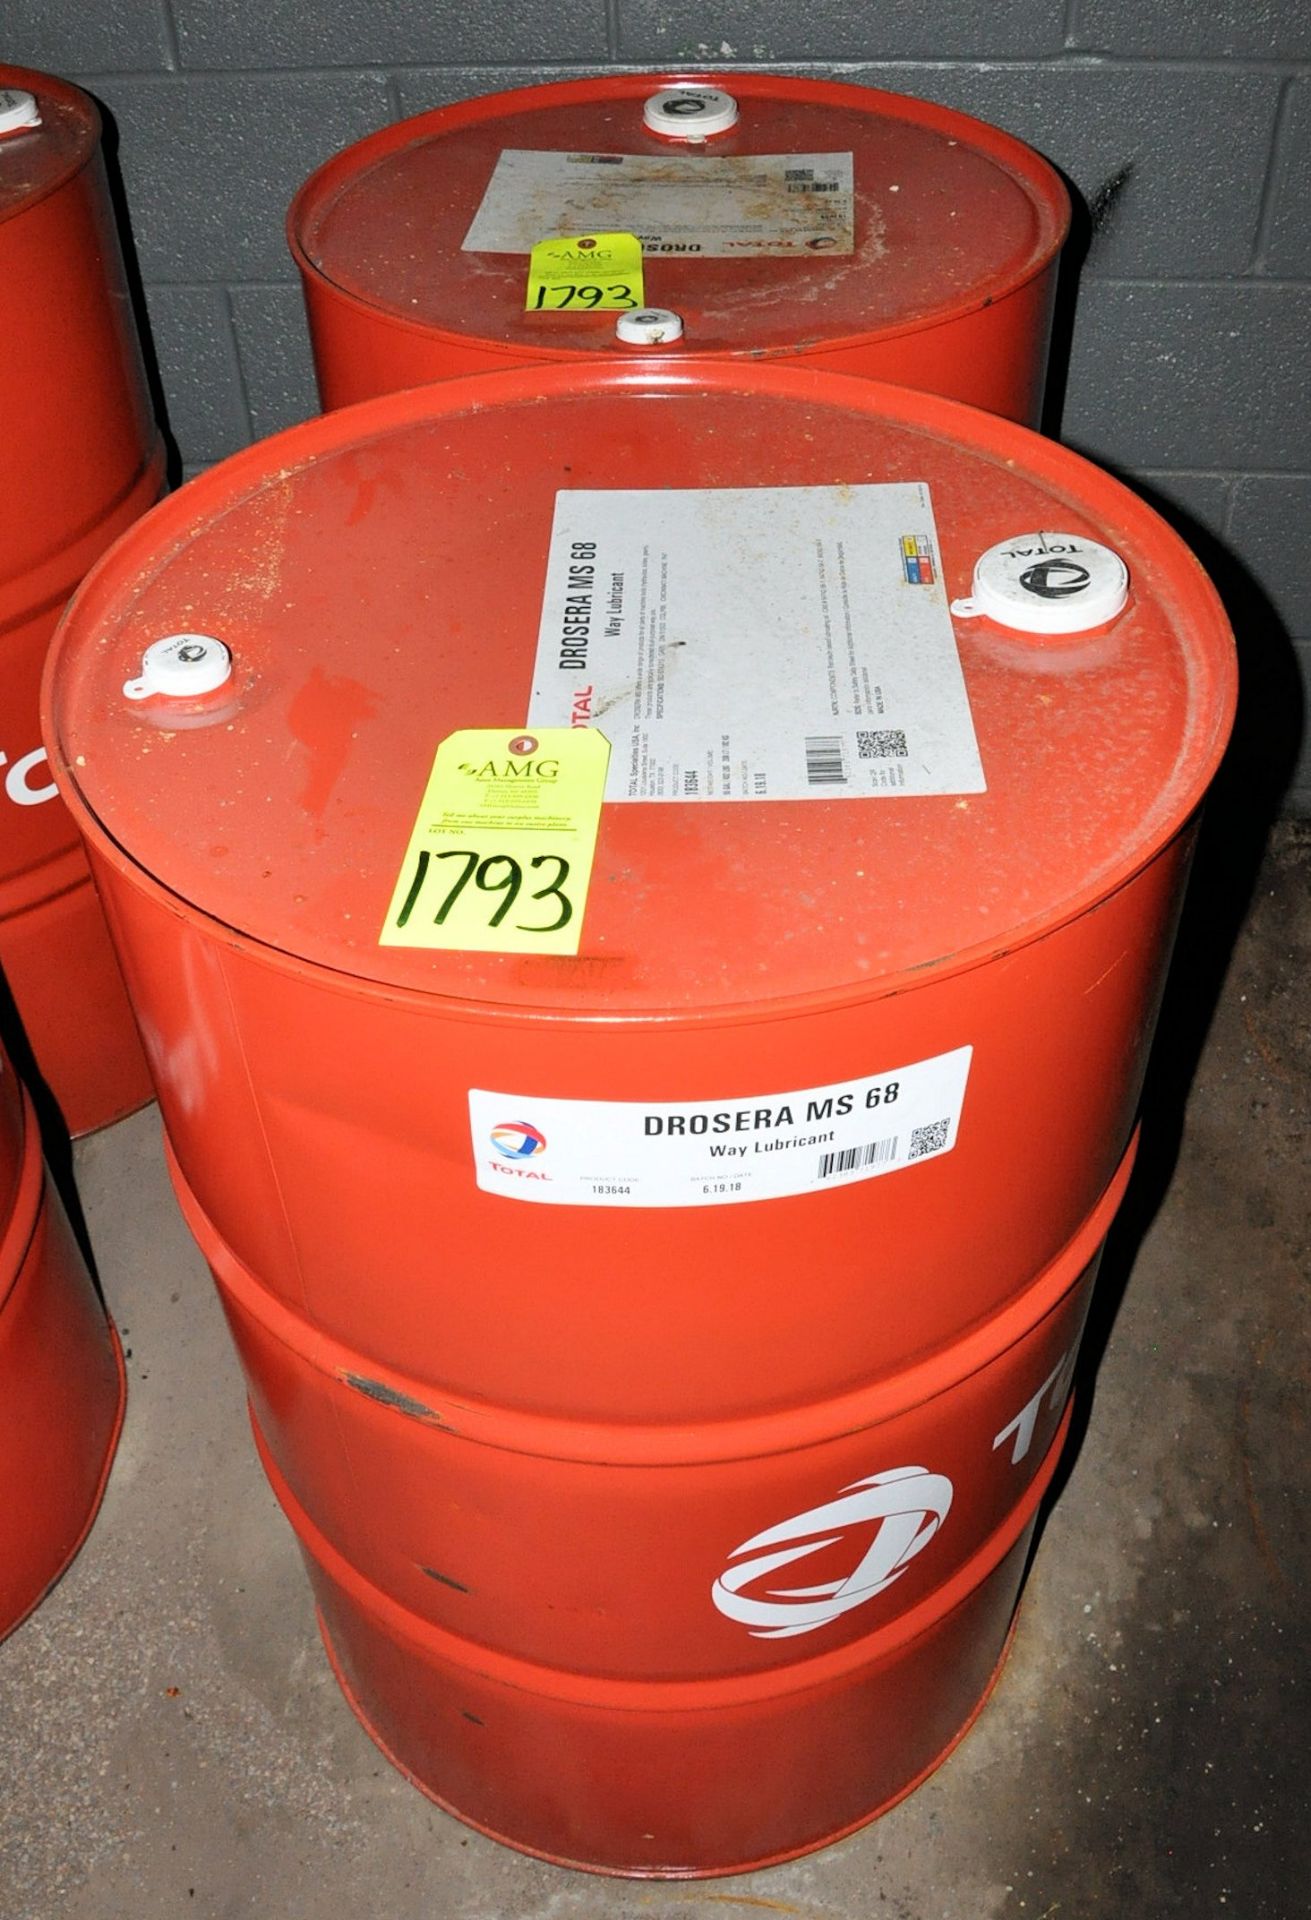 Lot-(2) 55-Gallon Drums of Total Drosera MS 68 Way Lubricant, (Oils Storage Building), (Yellow Tag)